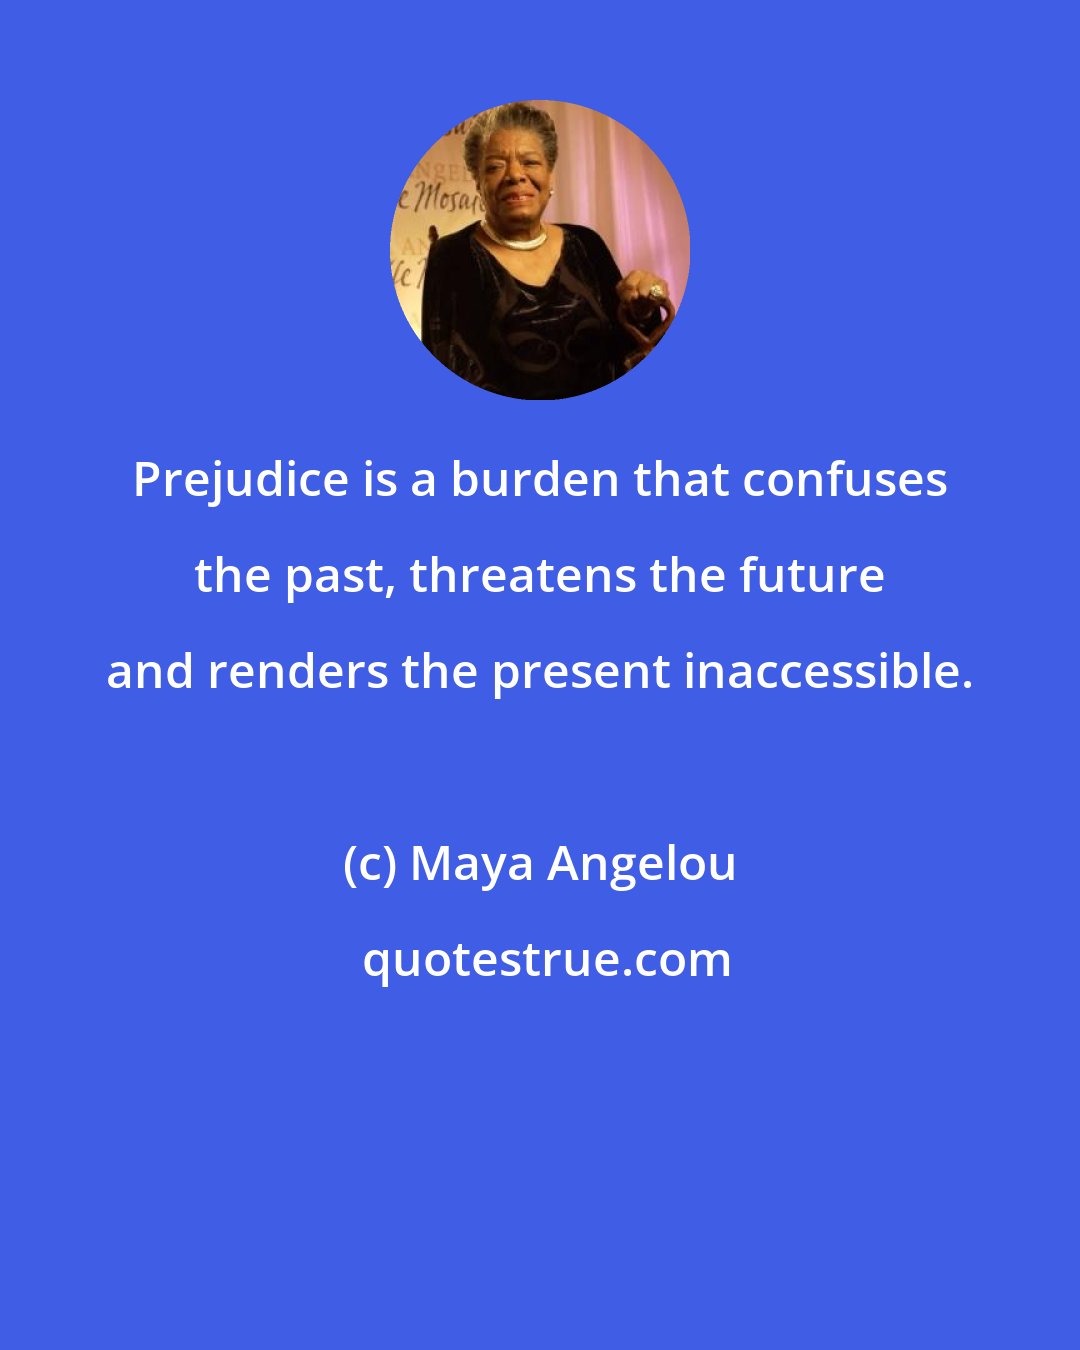 Maya Angelou: Prejudice is a burden that confuses the past, threatens the future and renders the present inaccessible.